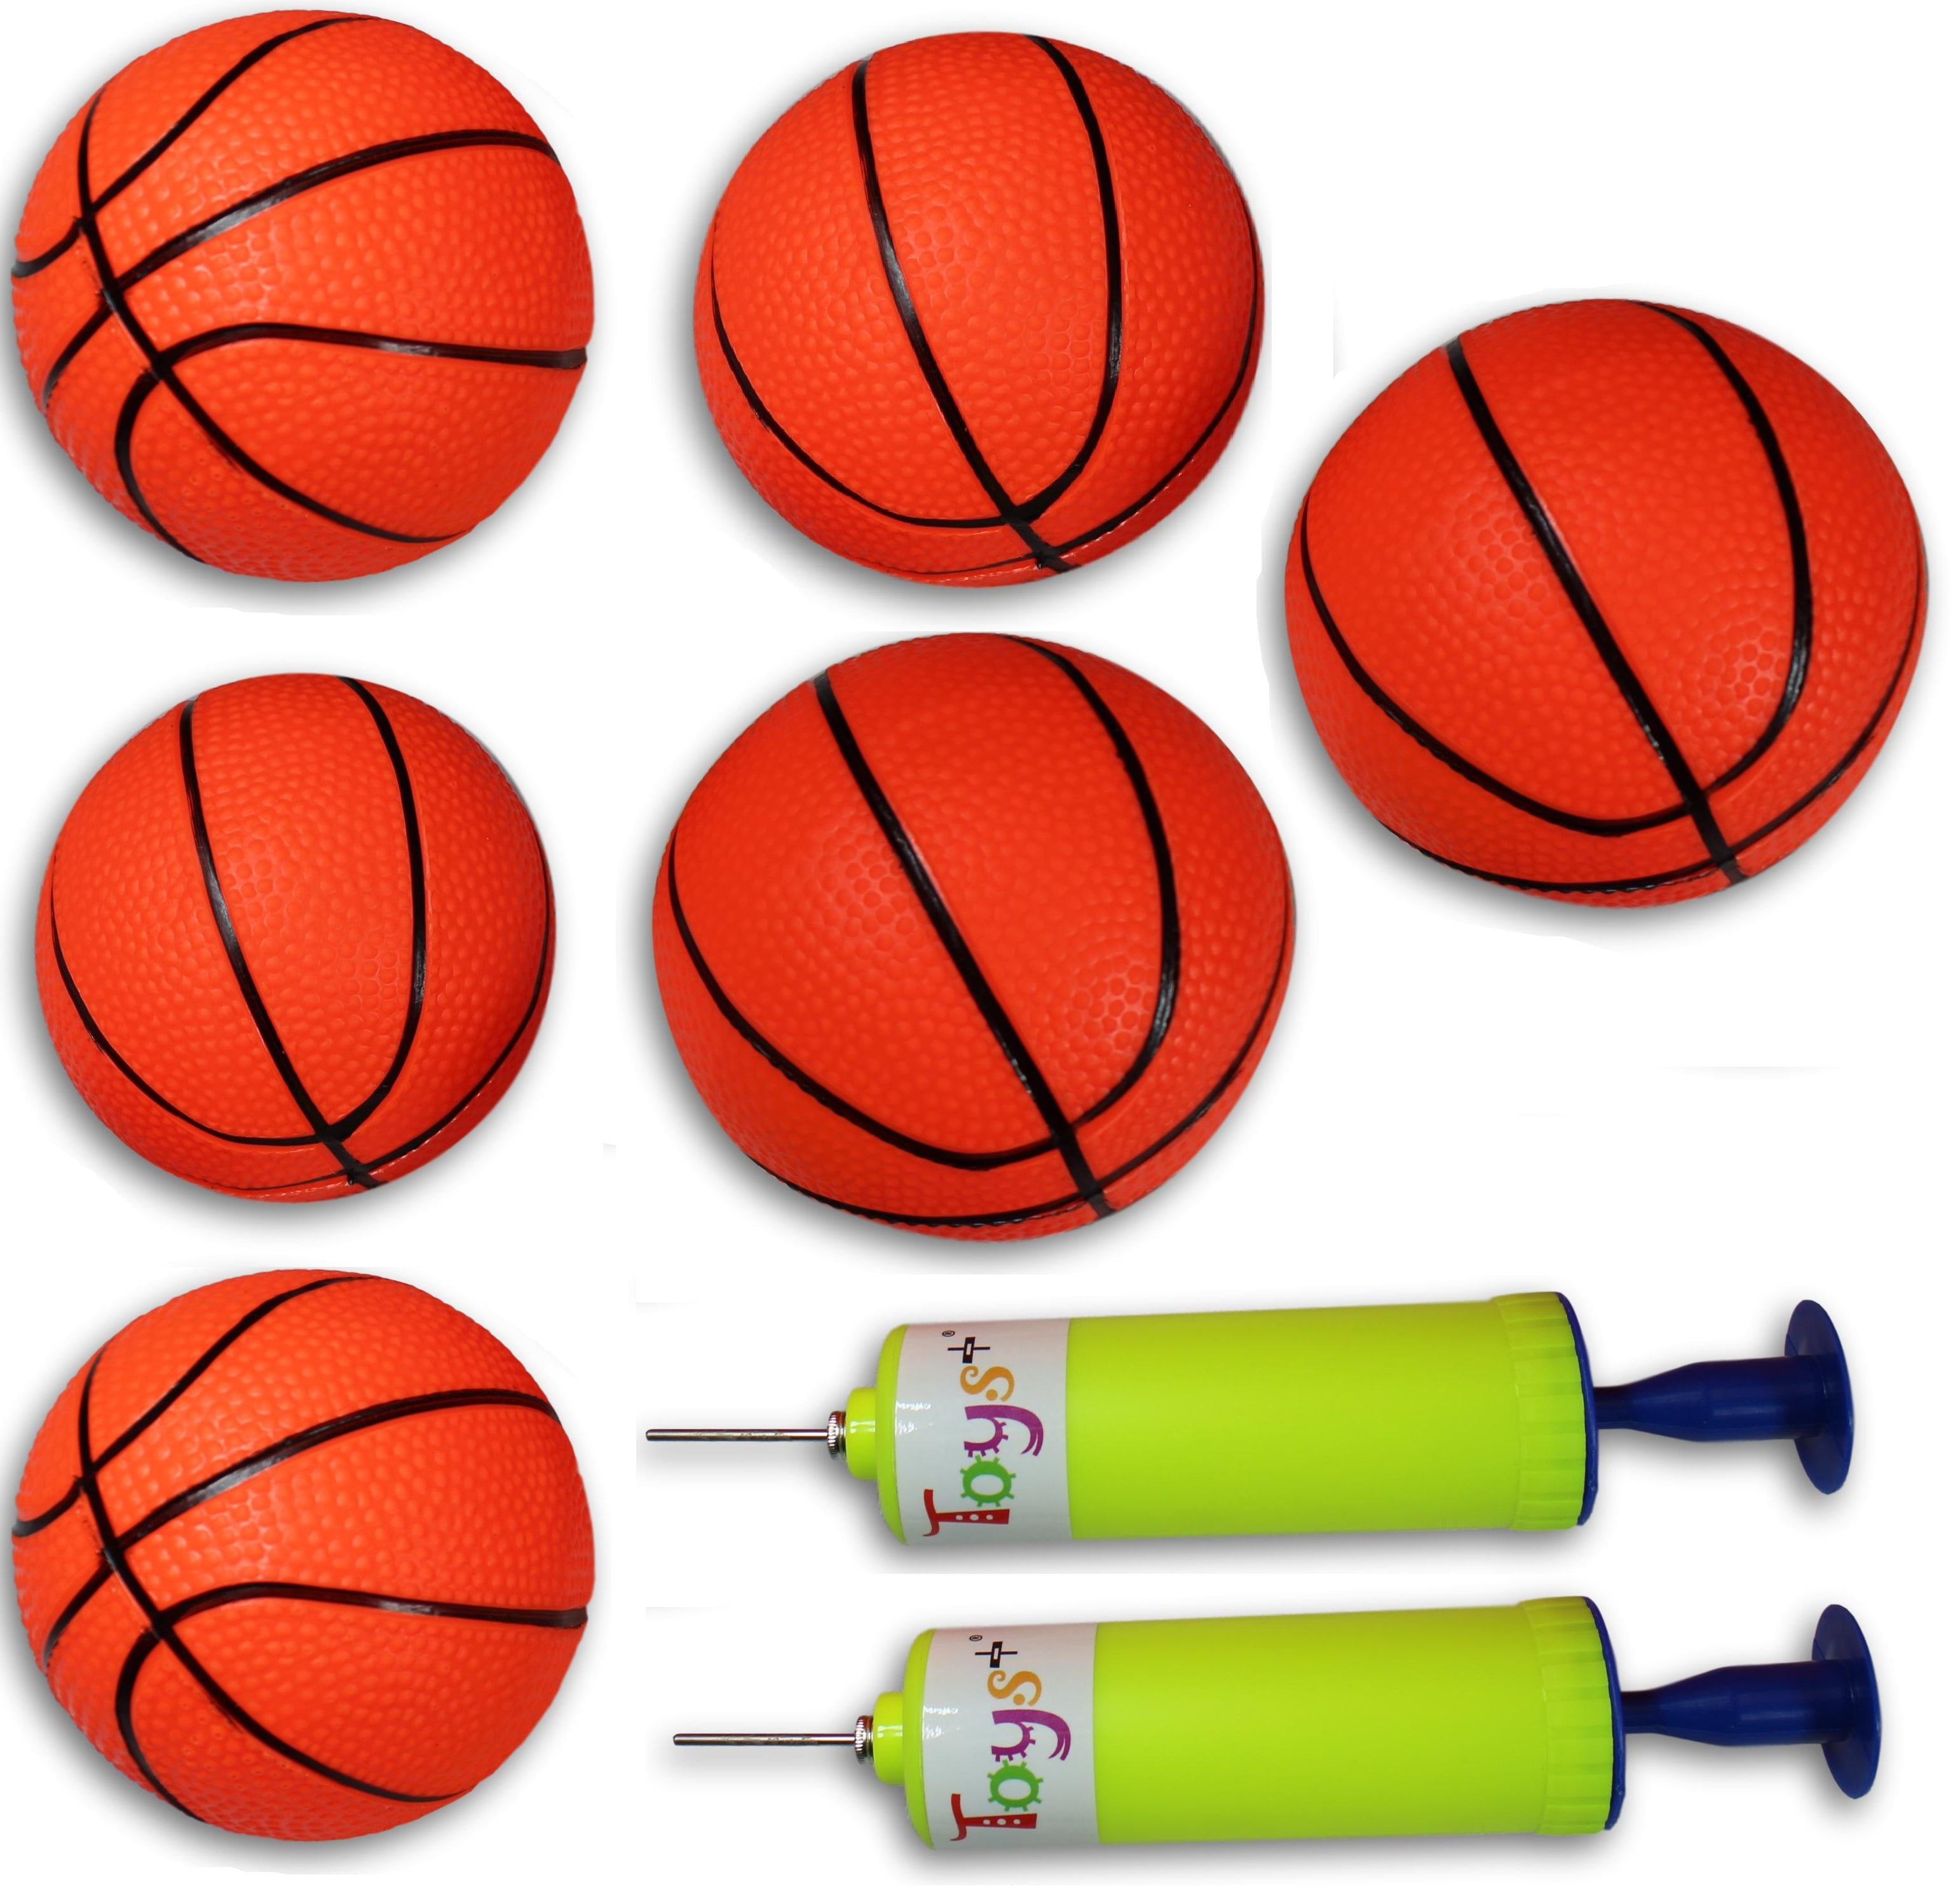 Gejoy 6 Packs Mini Basketball Replacement Rubber Mini Toy Plastic Basketballs 7 